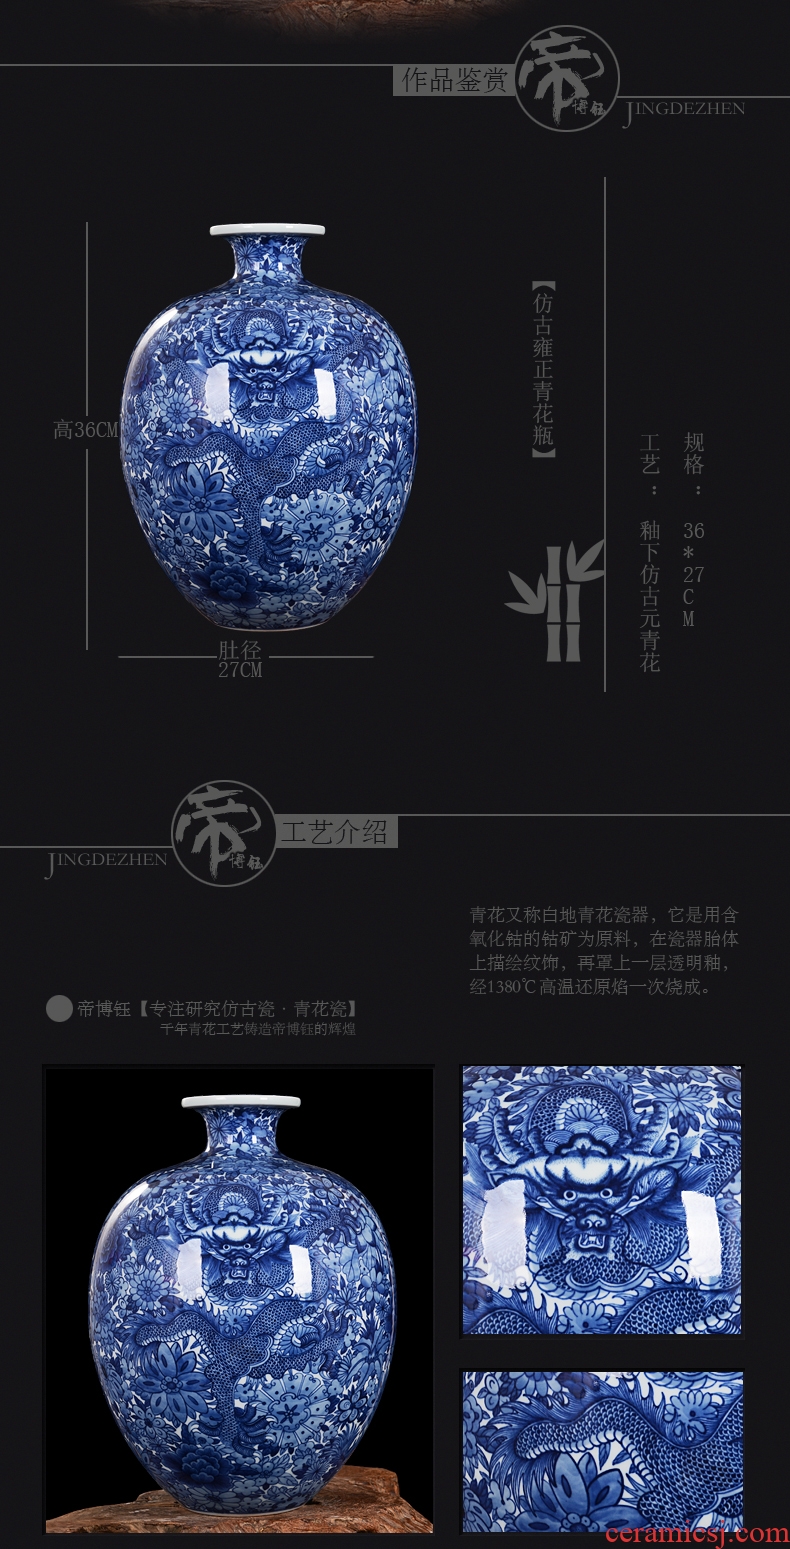 Jingdezhen ceramics yongzheng style antique blue and white porcelain vases, antique collectibles household study pomegranate bottle furnishing articles